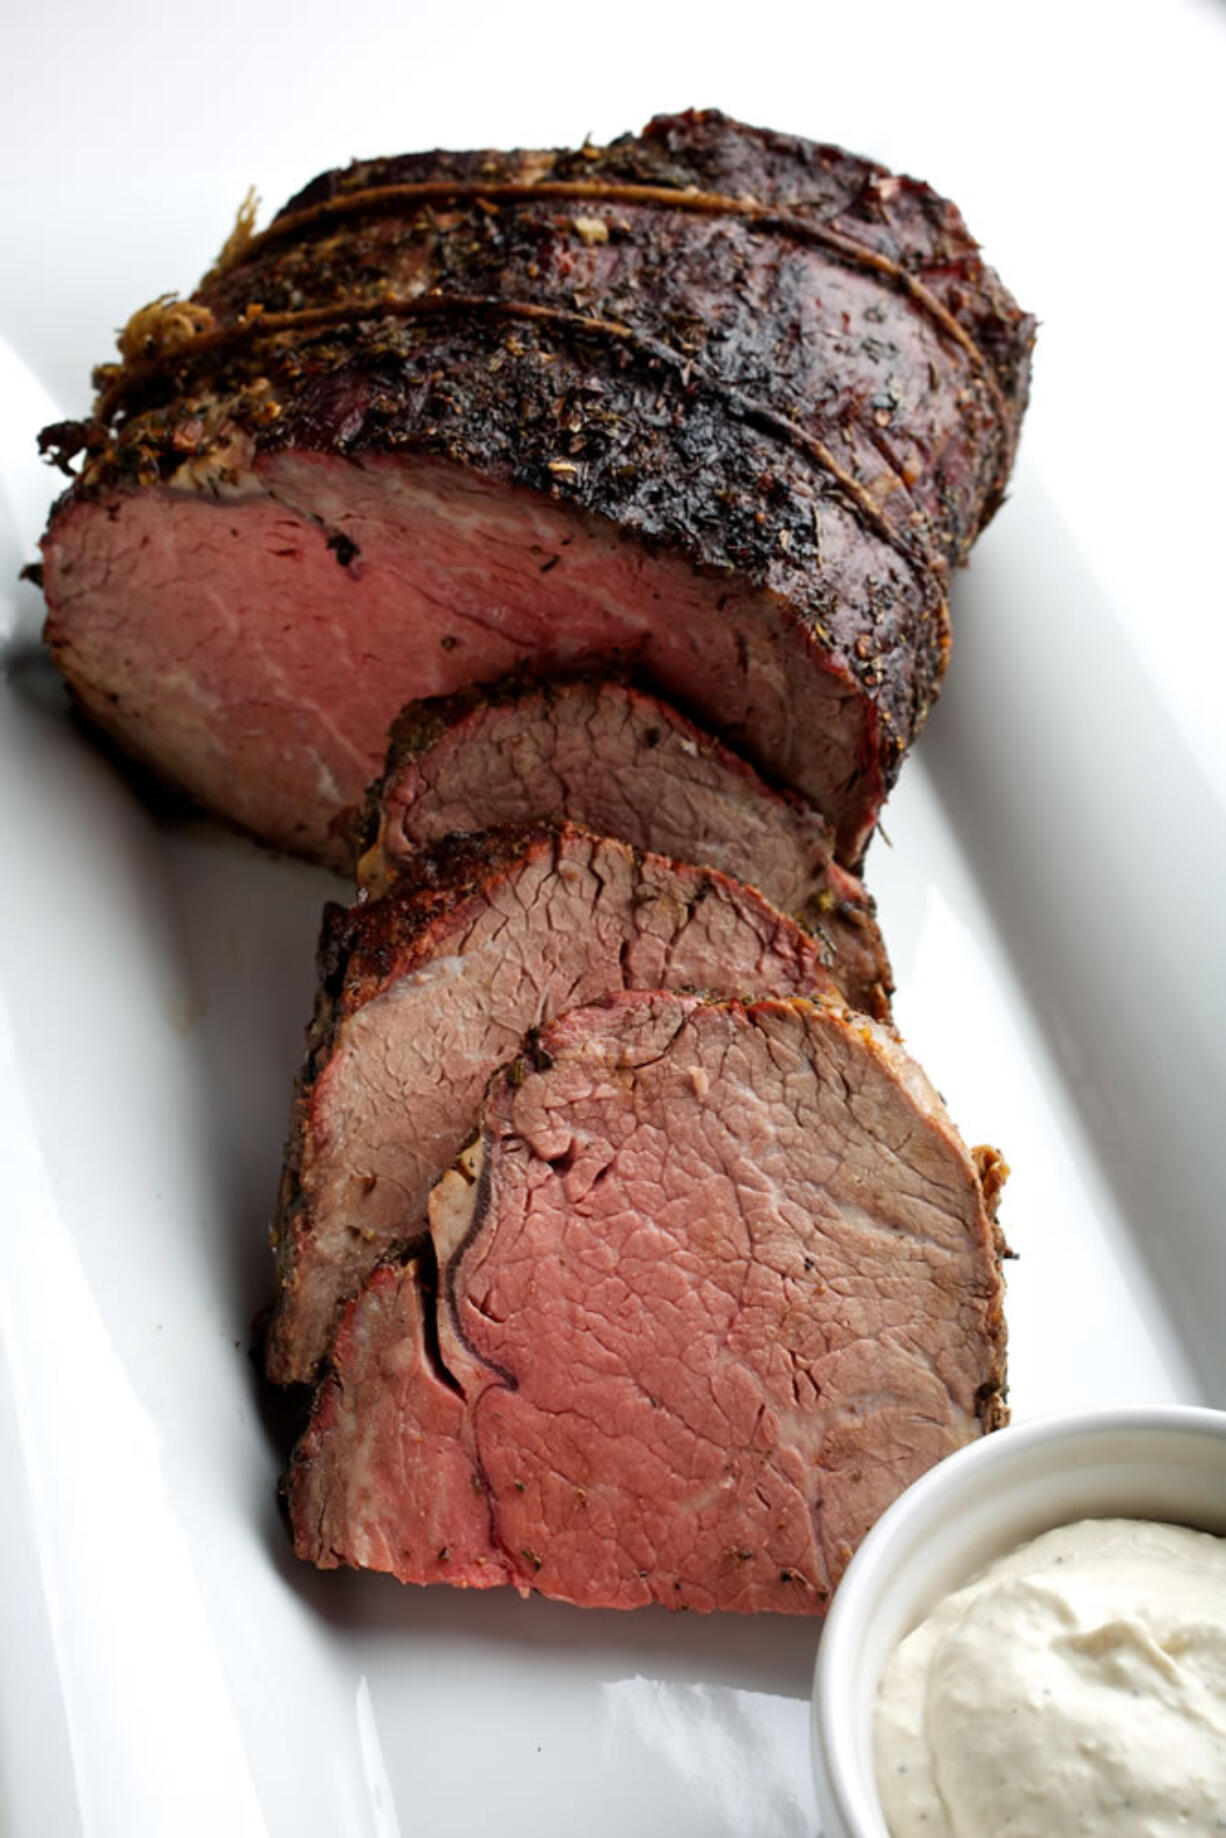 Prime rib is a kingly meat, made all the more glorious when smoked.